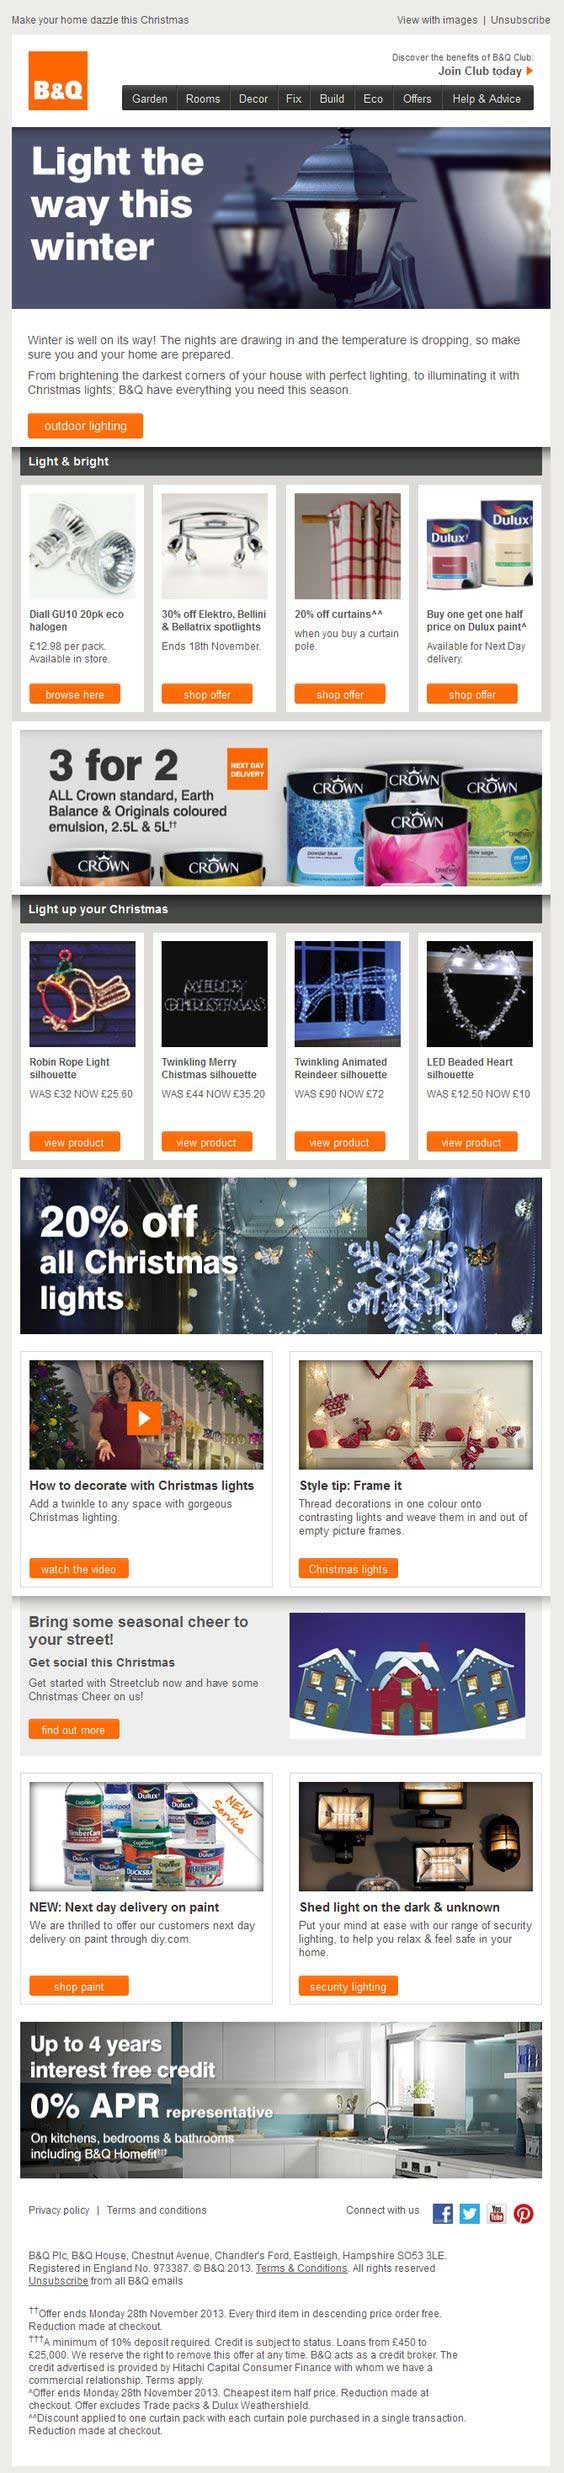 B&Q static email example